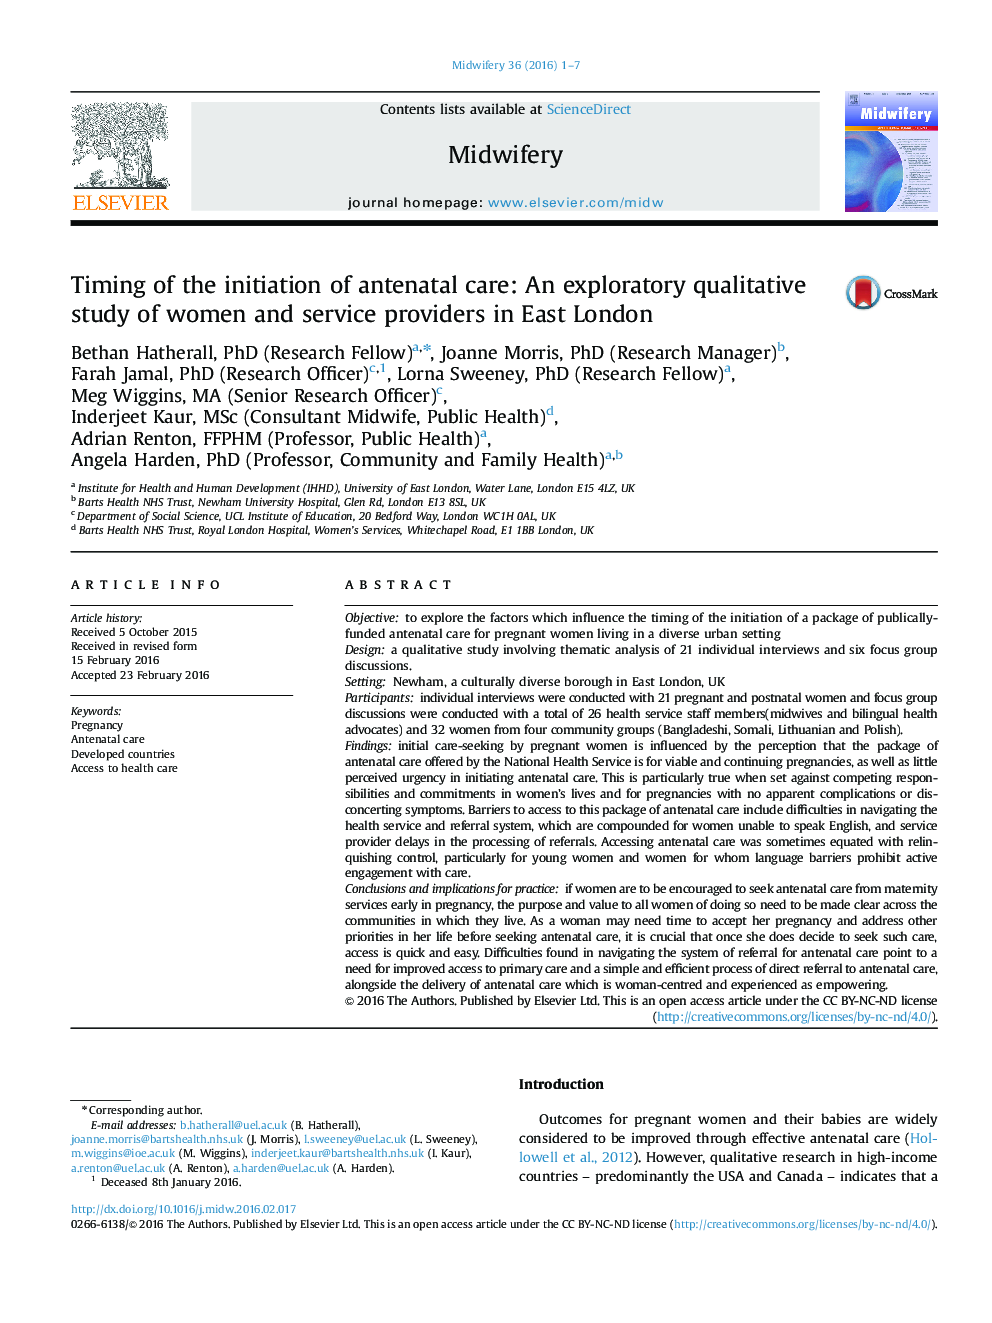 Timing of the initiation of antenatal care: An exploratory qualitative study of women and service providers in East London